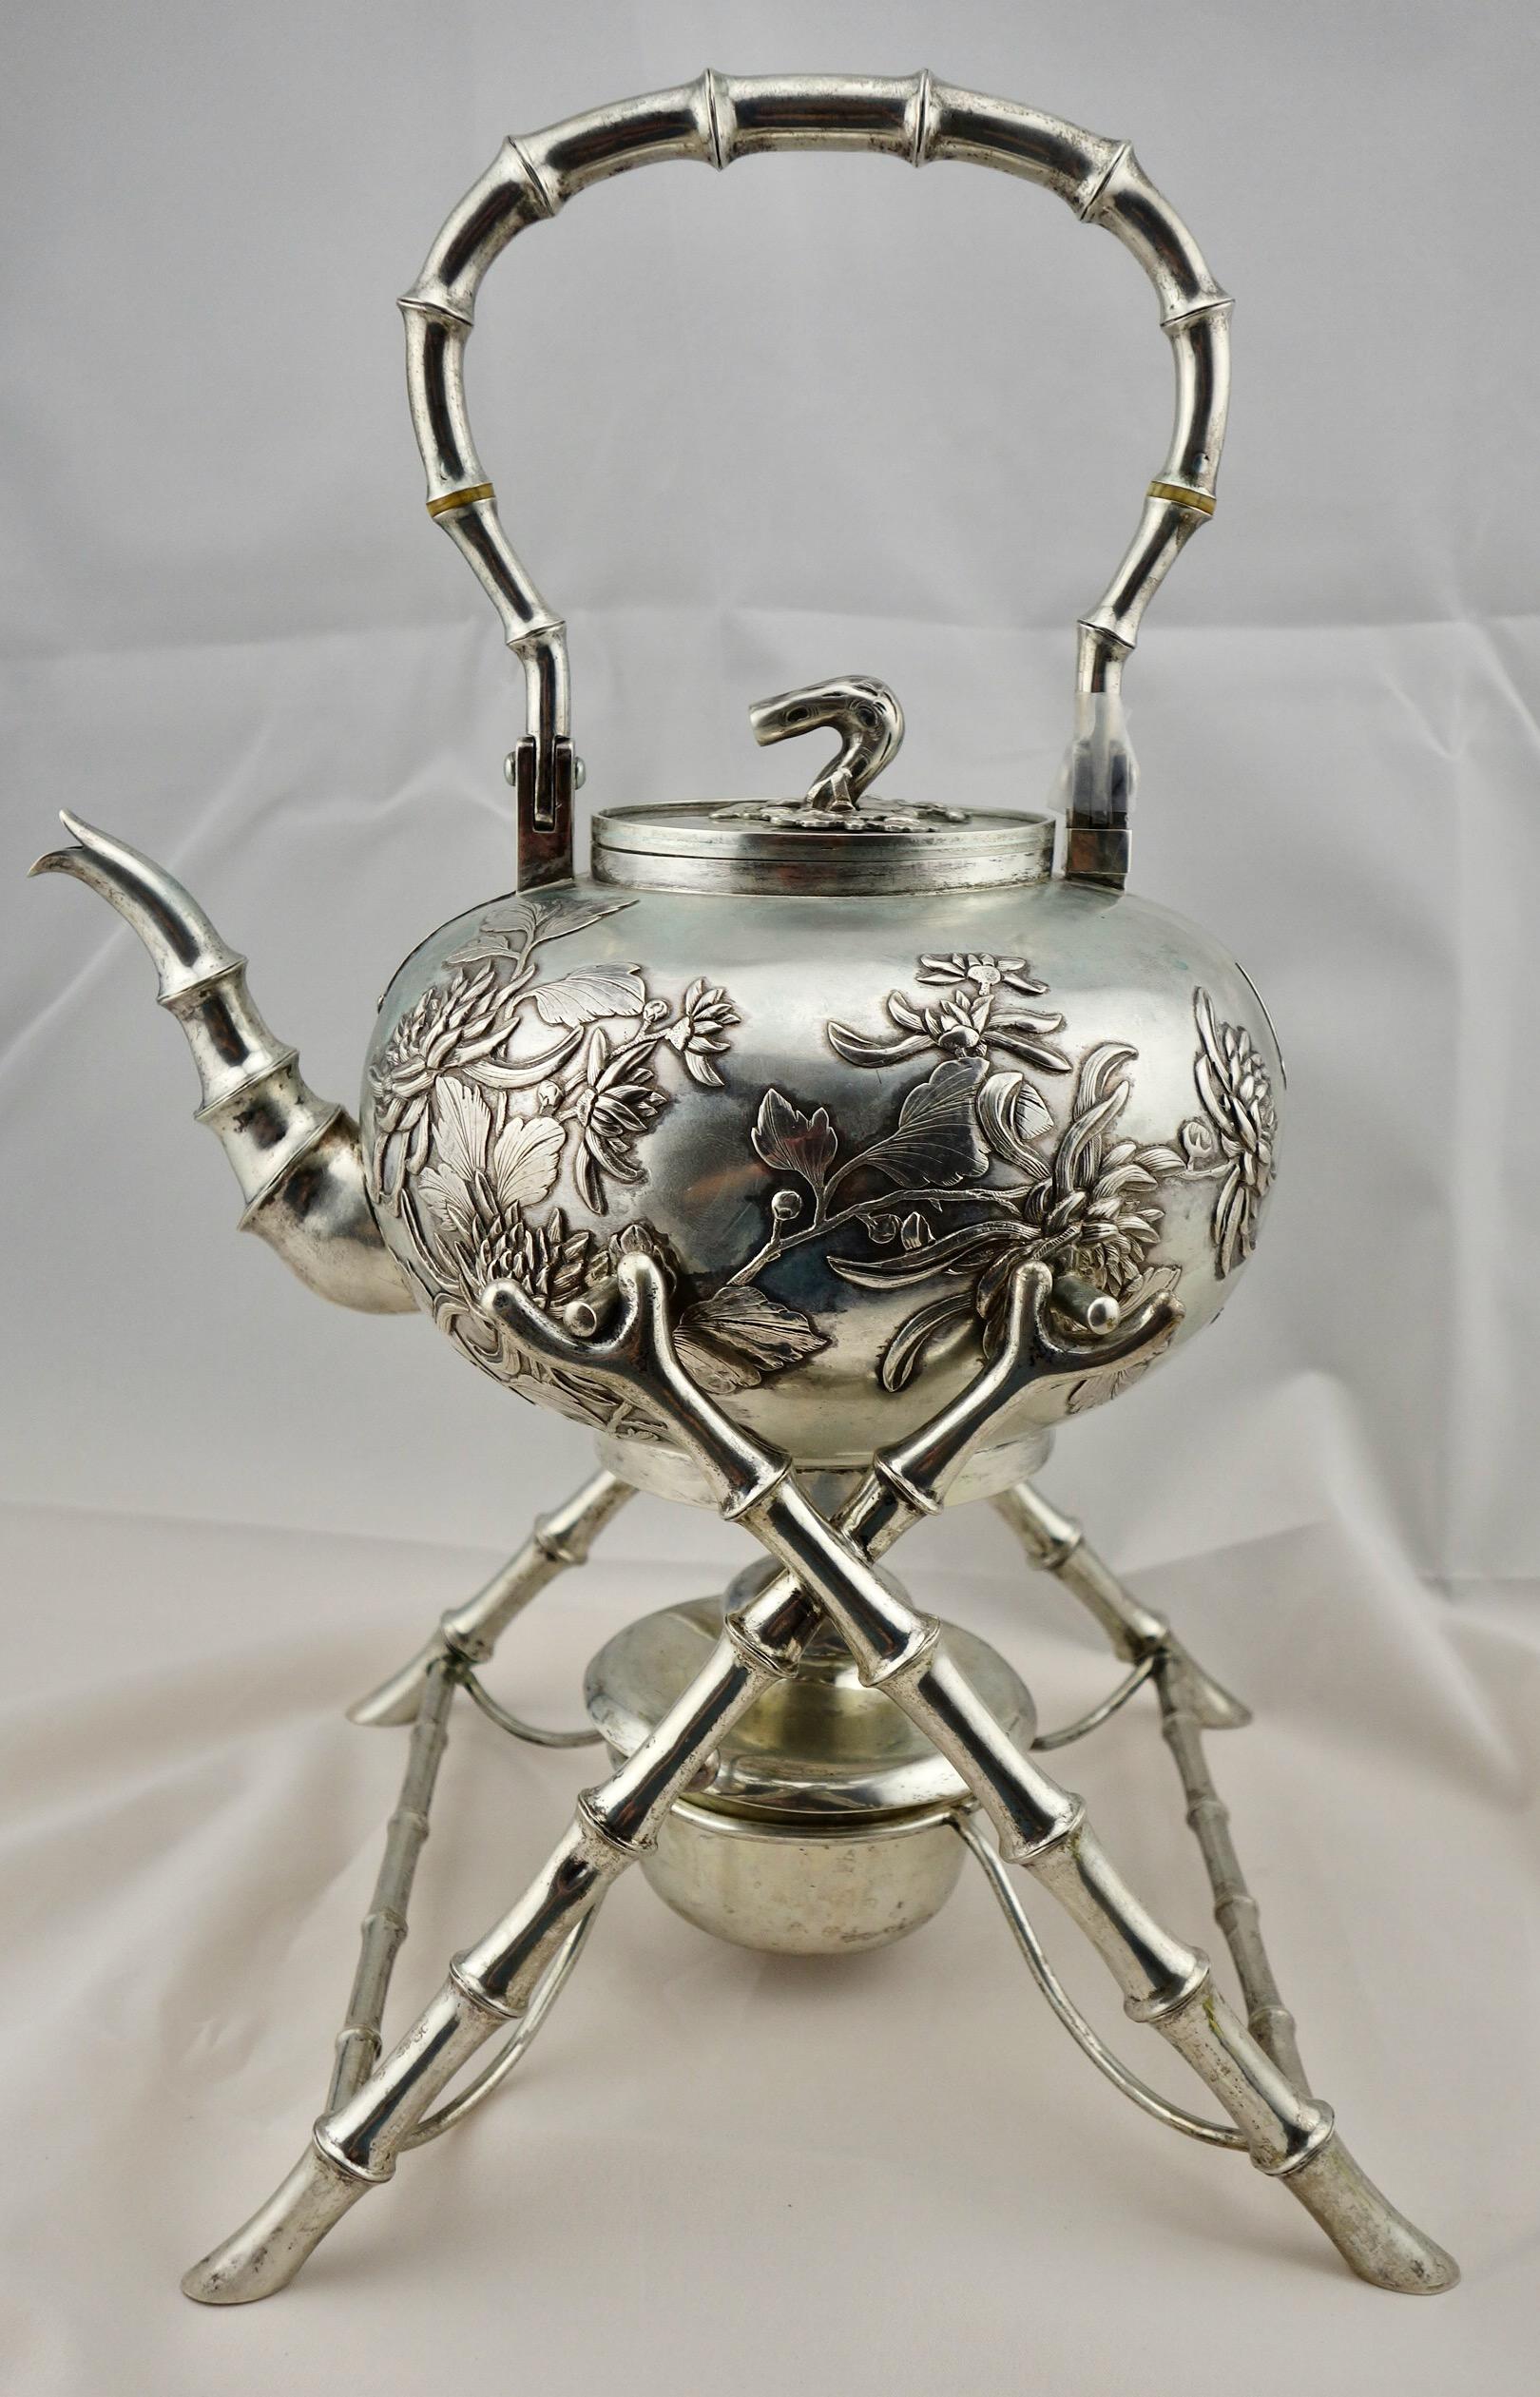 Other Chinese Export Silver Teapot or Kettle on a Stand by Leeching, circa 1900 For Sale